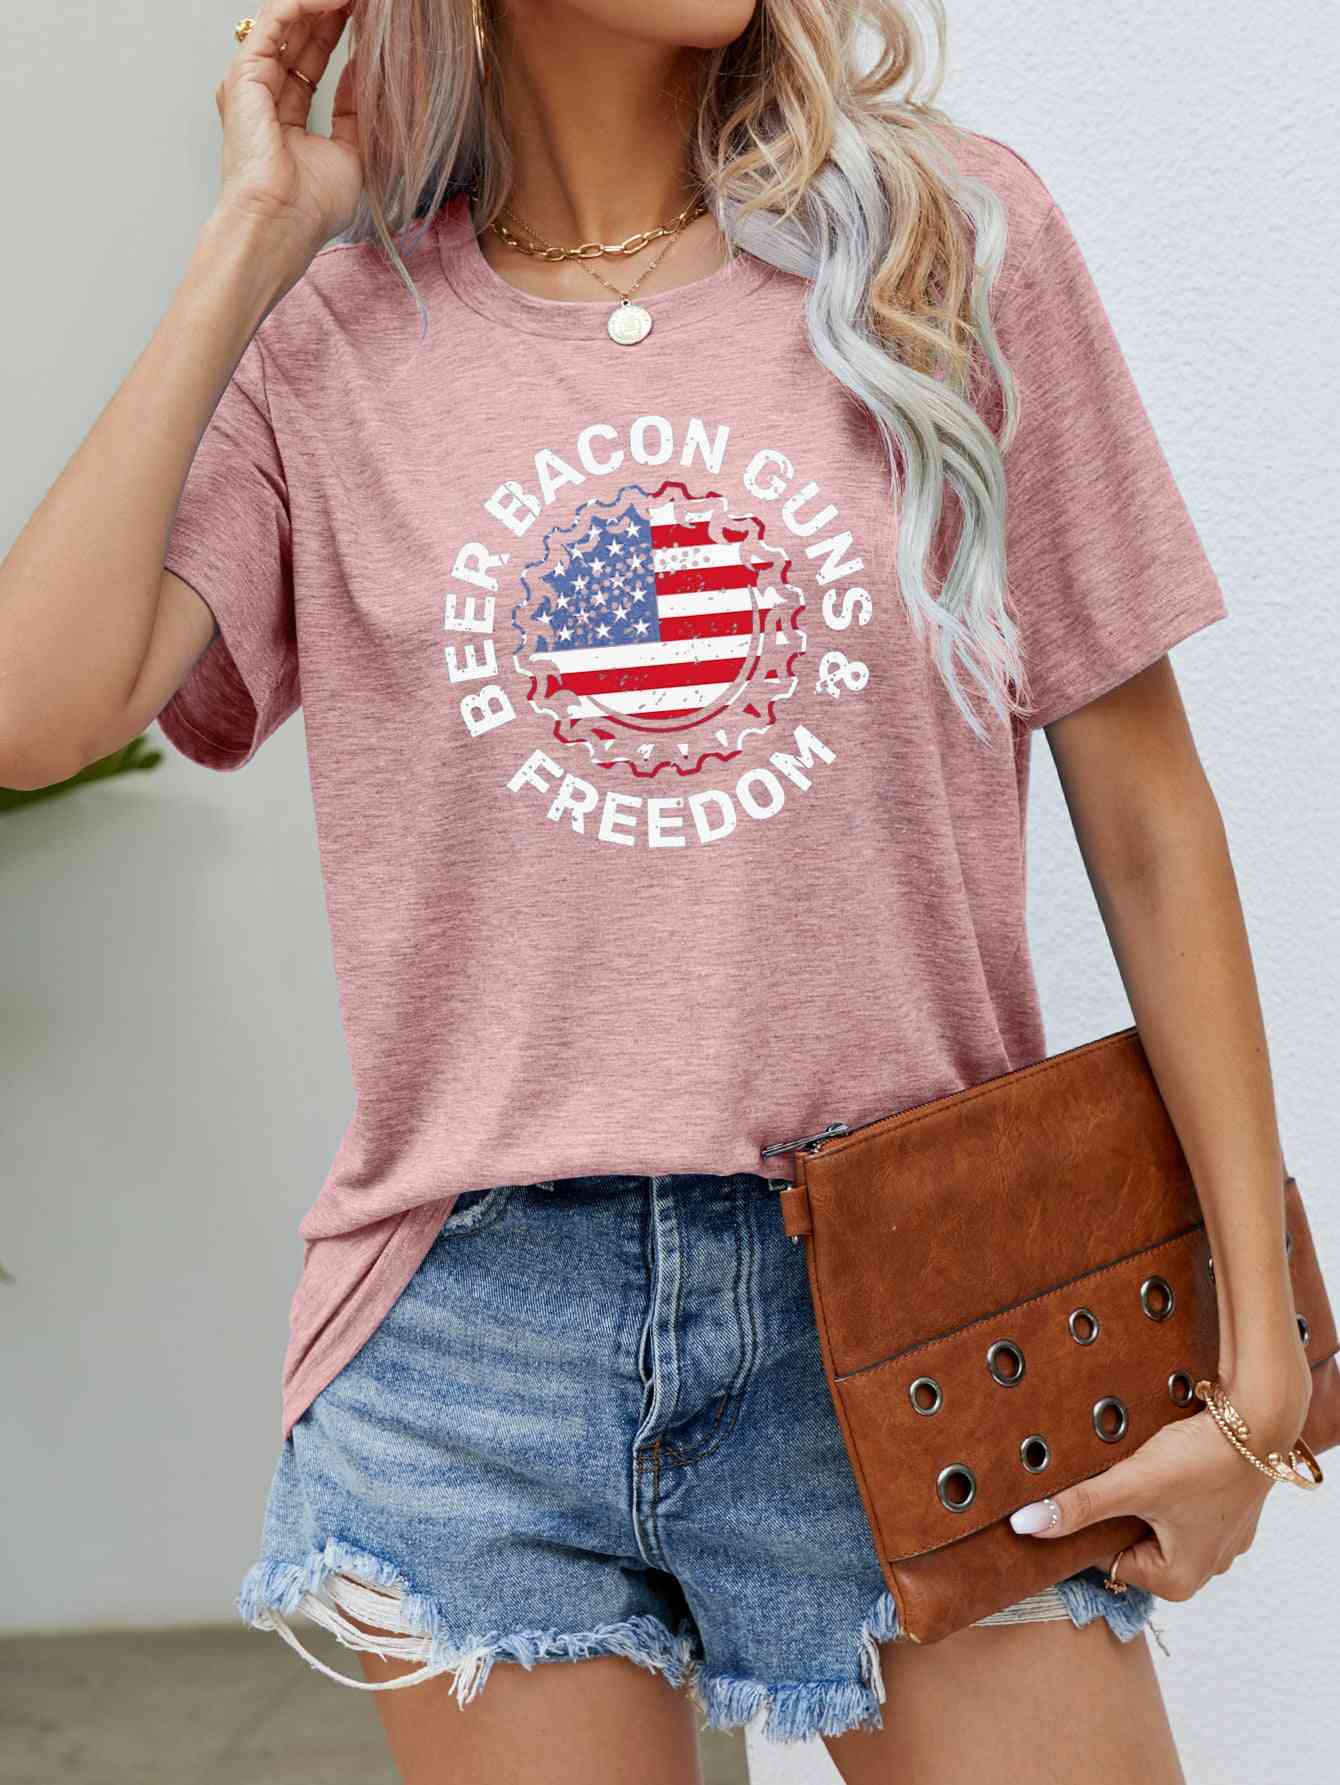 BEER BACON GUNS & FREEDOM US Flag Graphic Tee Blush Pink S 